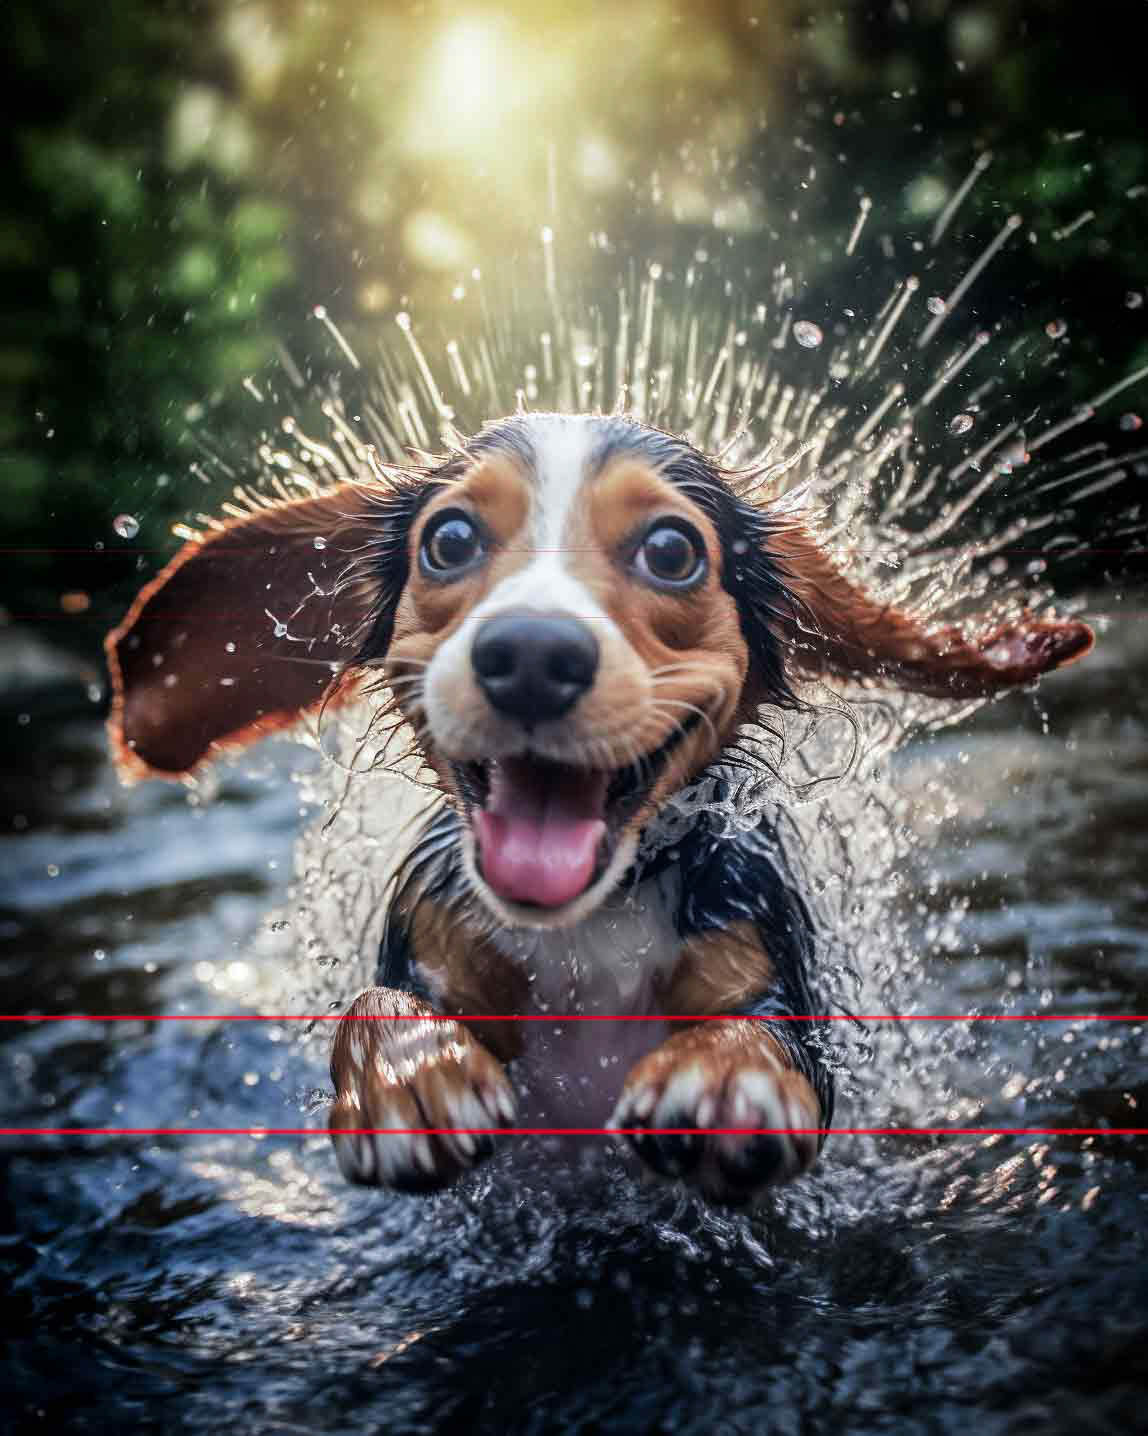 A joyful Beagle dog with wet fur splashes through water, creating a dramatic spray around its head. Its wide eyes and open mouth convey excitement. The picture has a blurred background with hints of greenery and sunlight filtering through, highlighting the dog's playful expression.